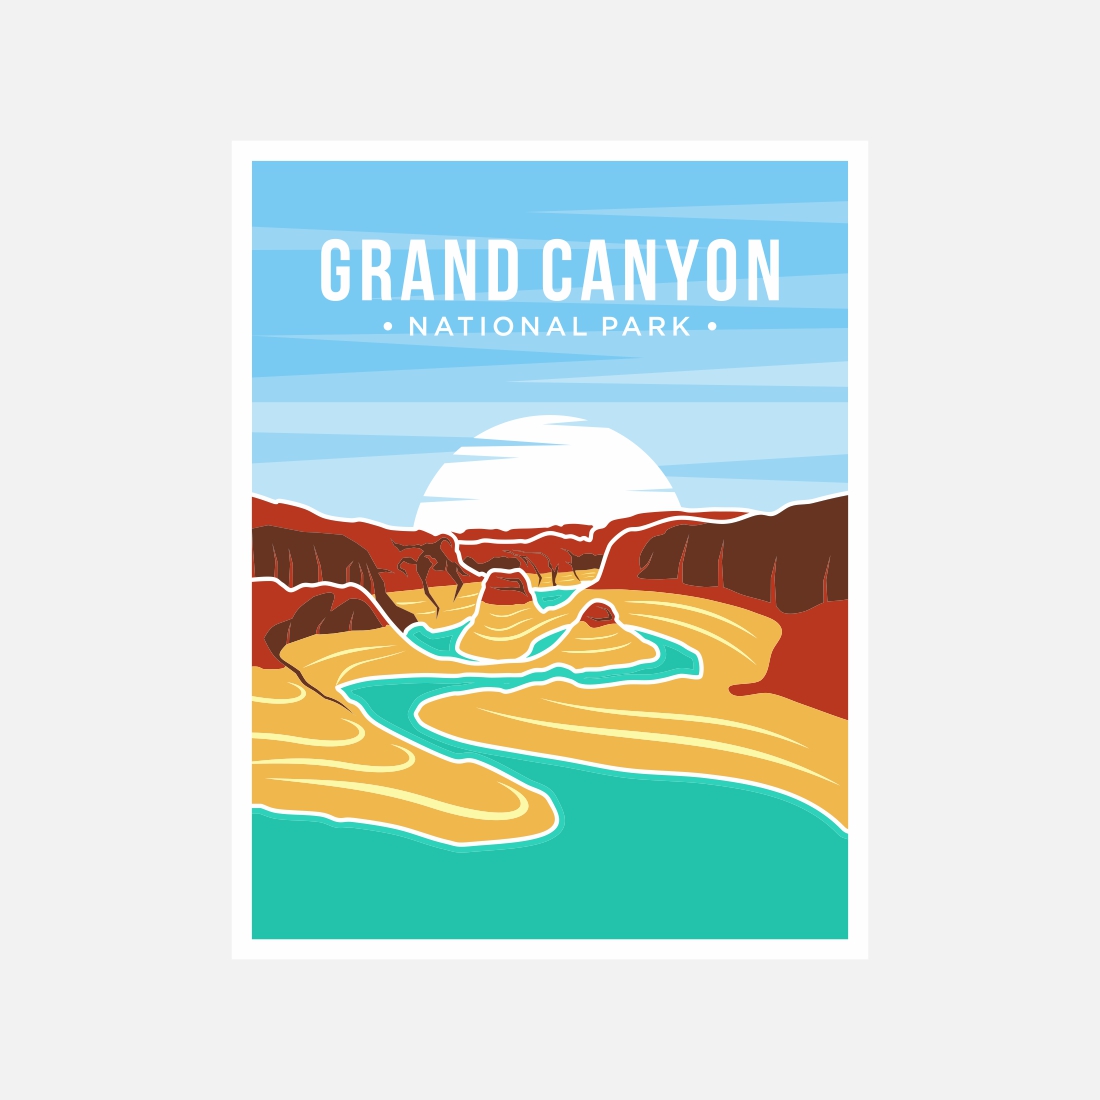 Grand Canyon National Park poster vector illustration design – Only $8 preview image.